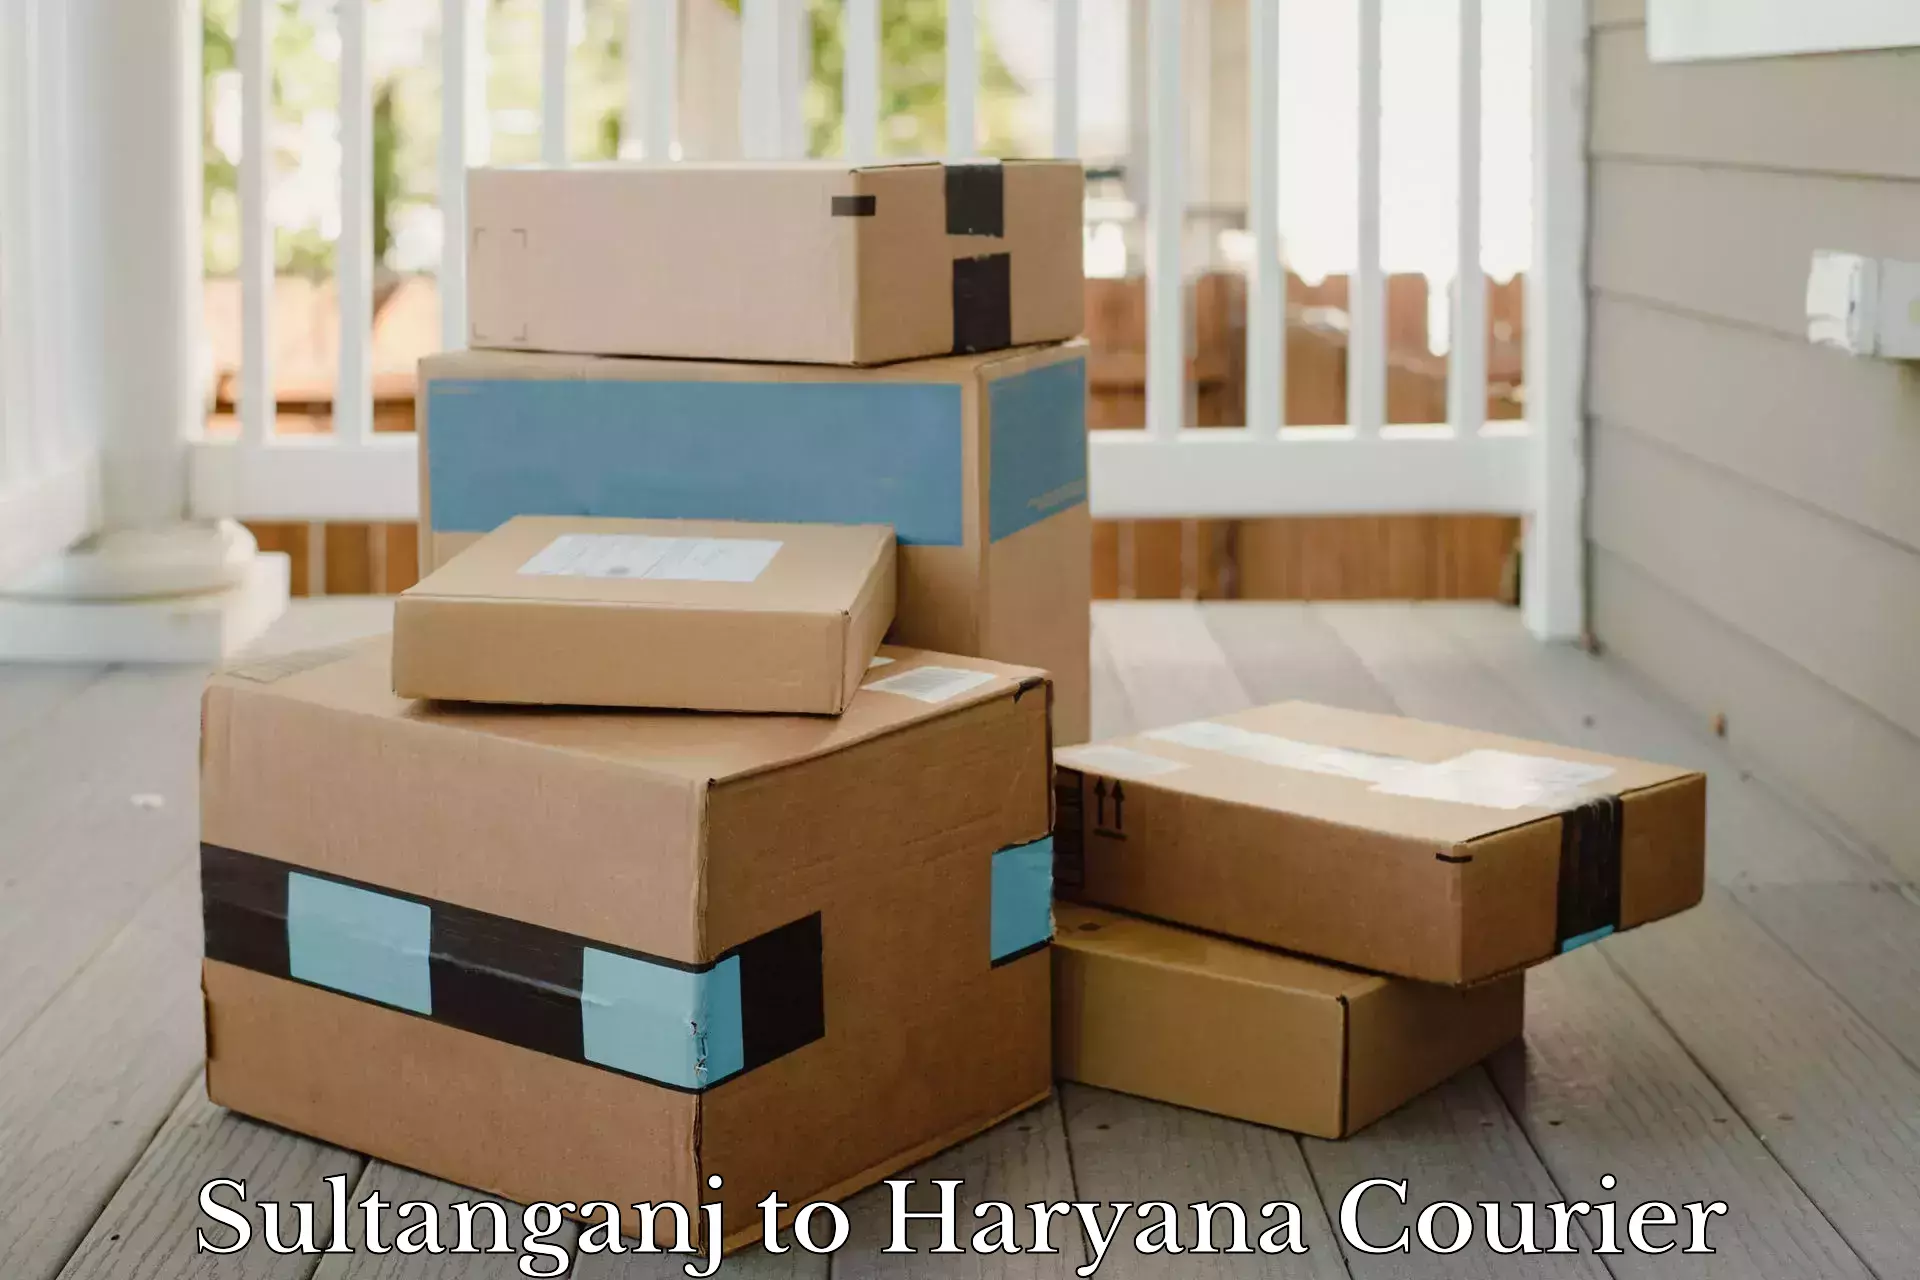 Small parcel delivery in Sultanganj to NCR Haryana